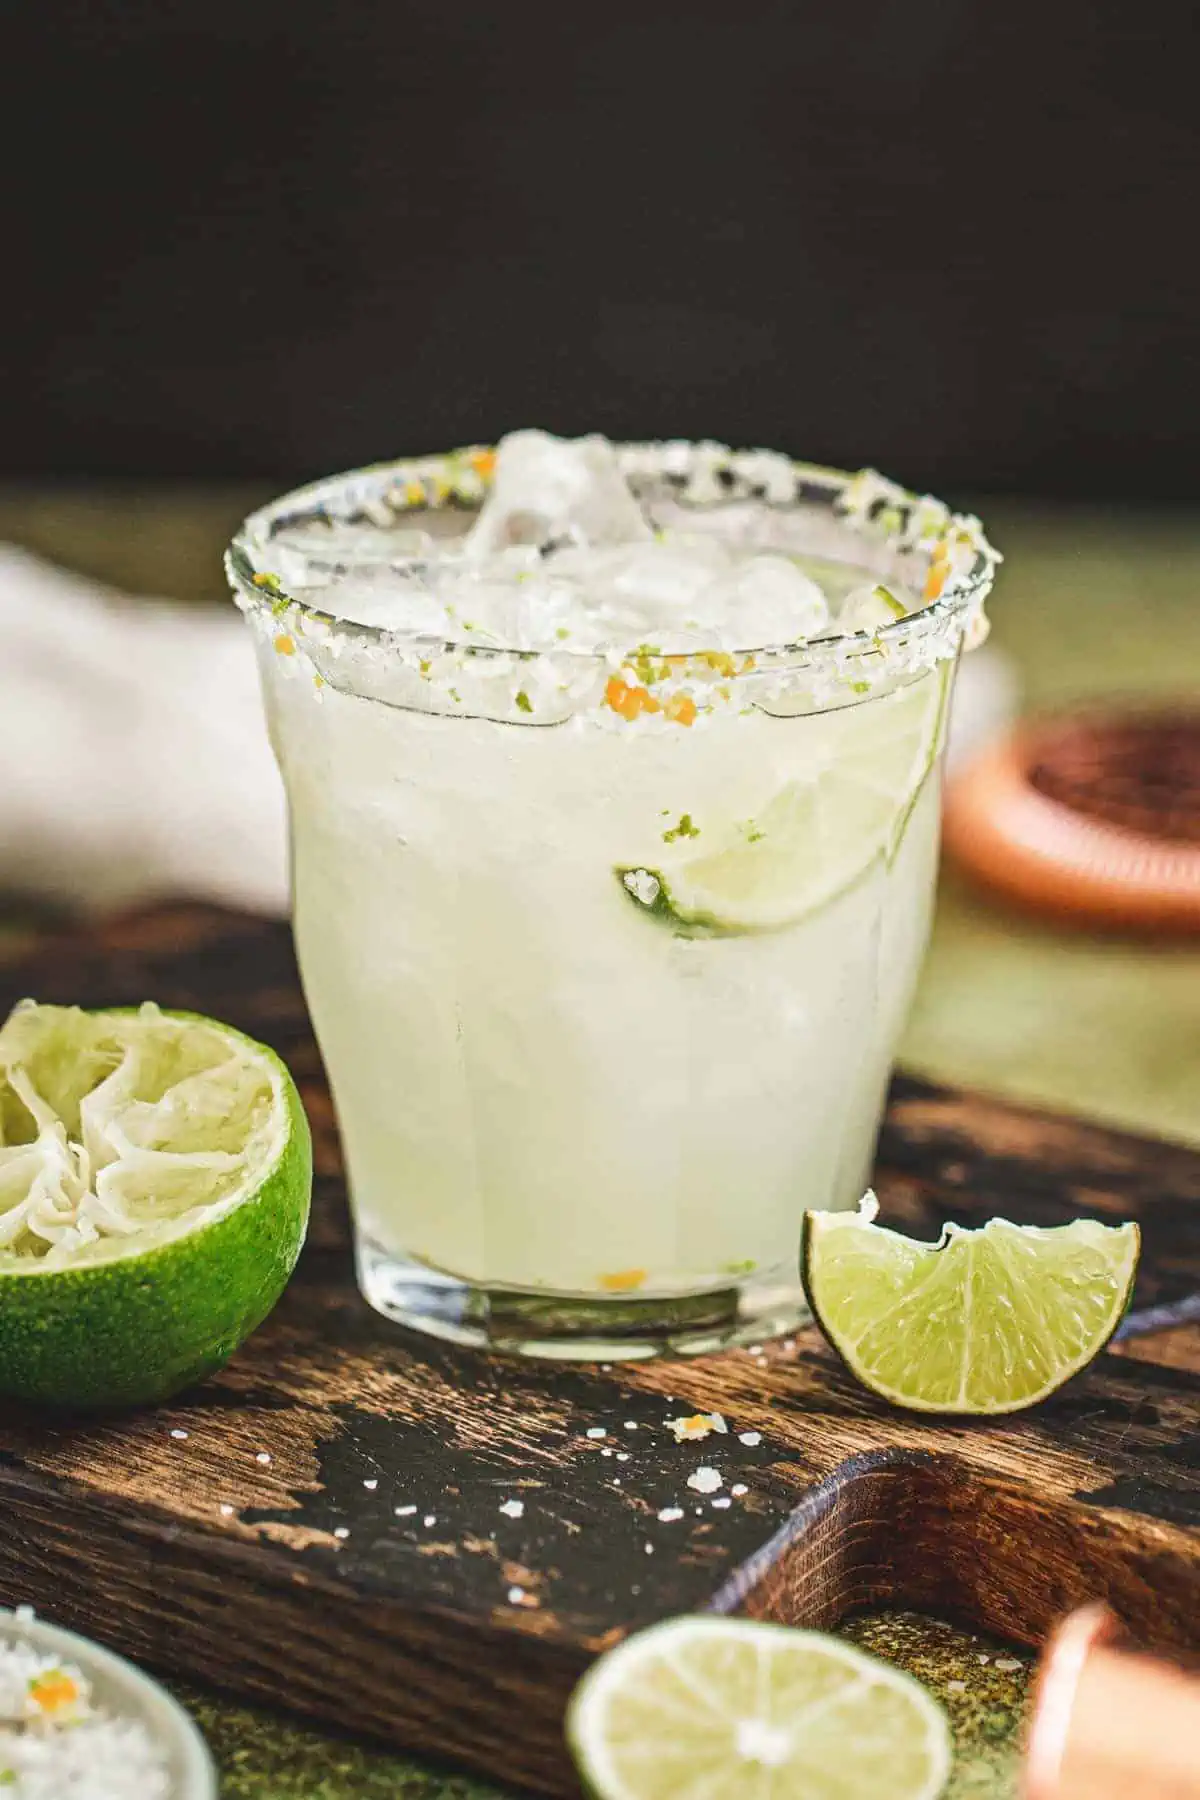 Gin margarita with a salted rim.